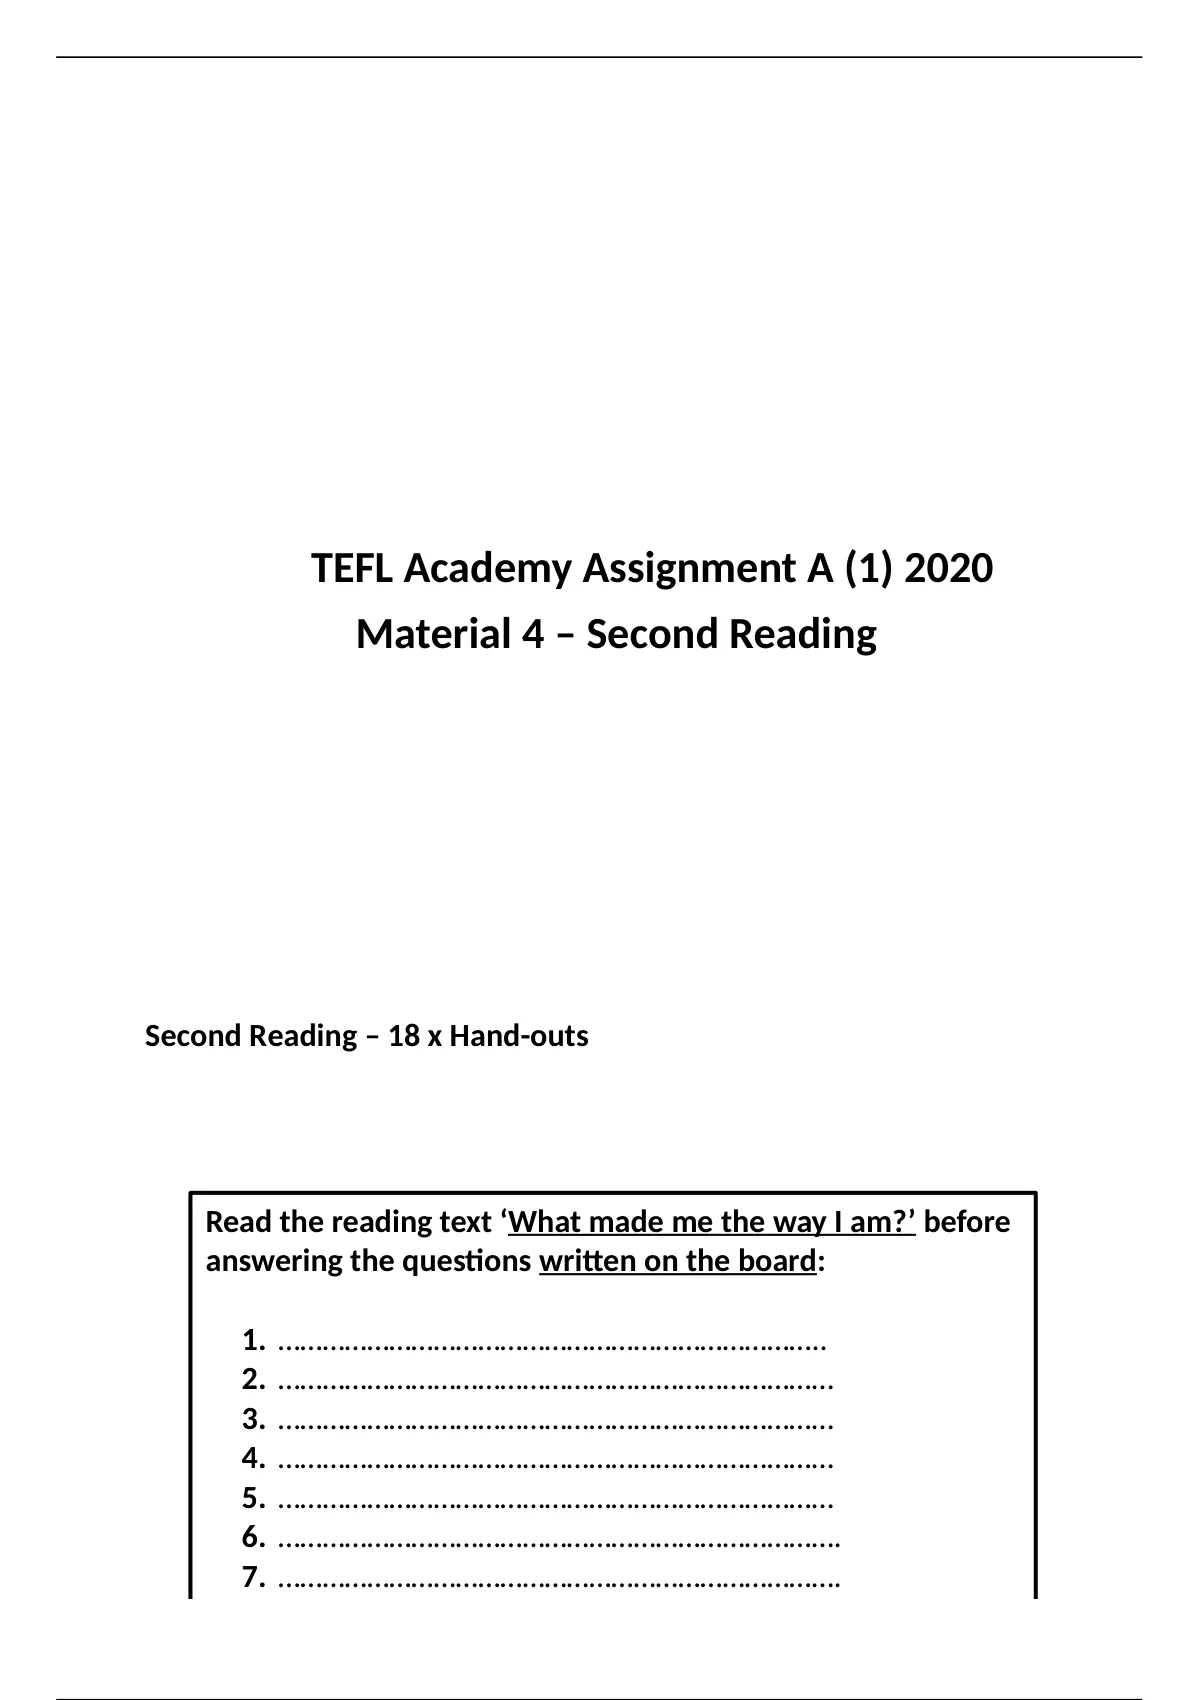 tefl academy assignment c answers